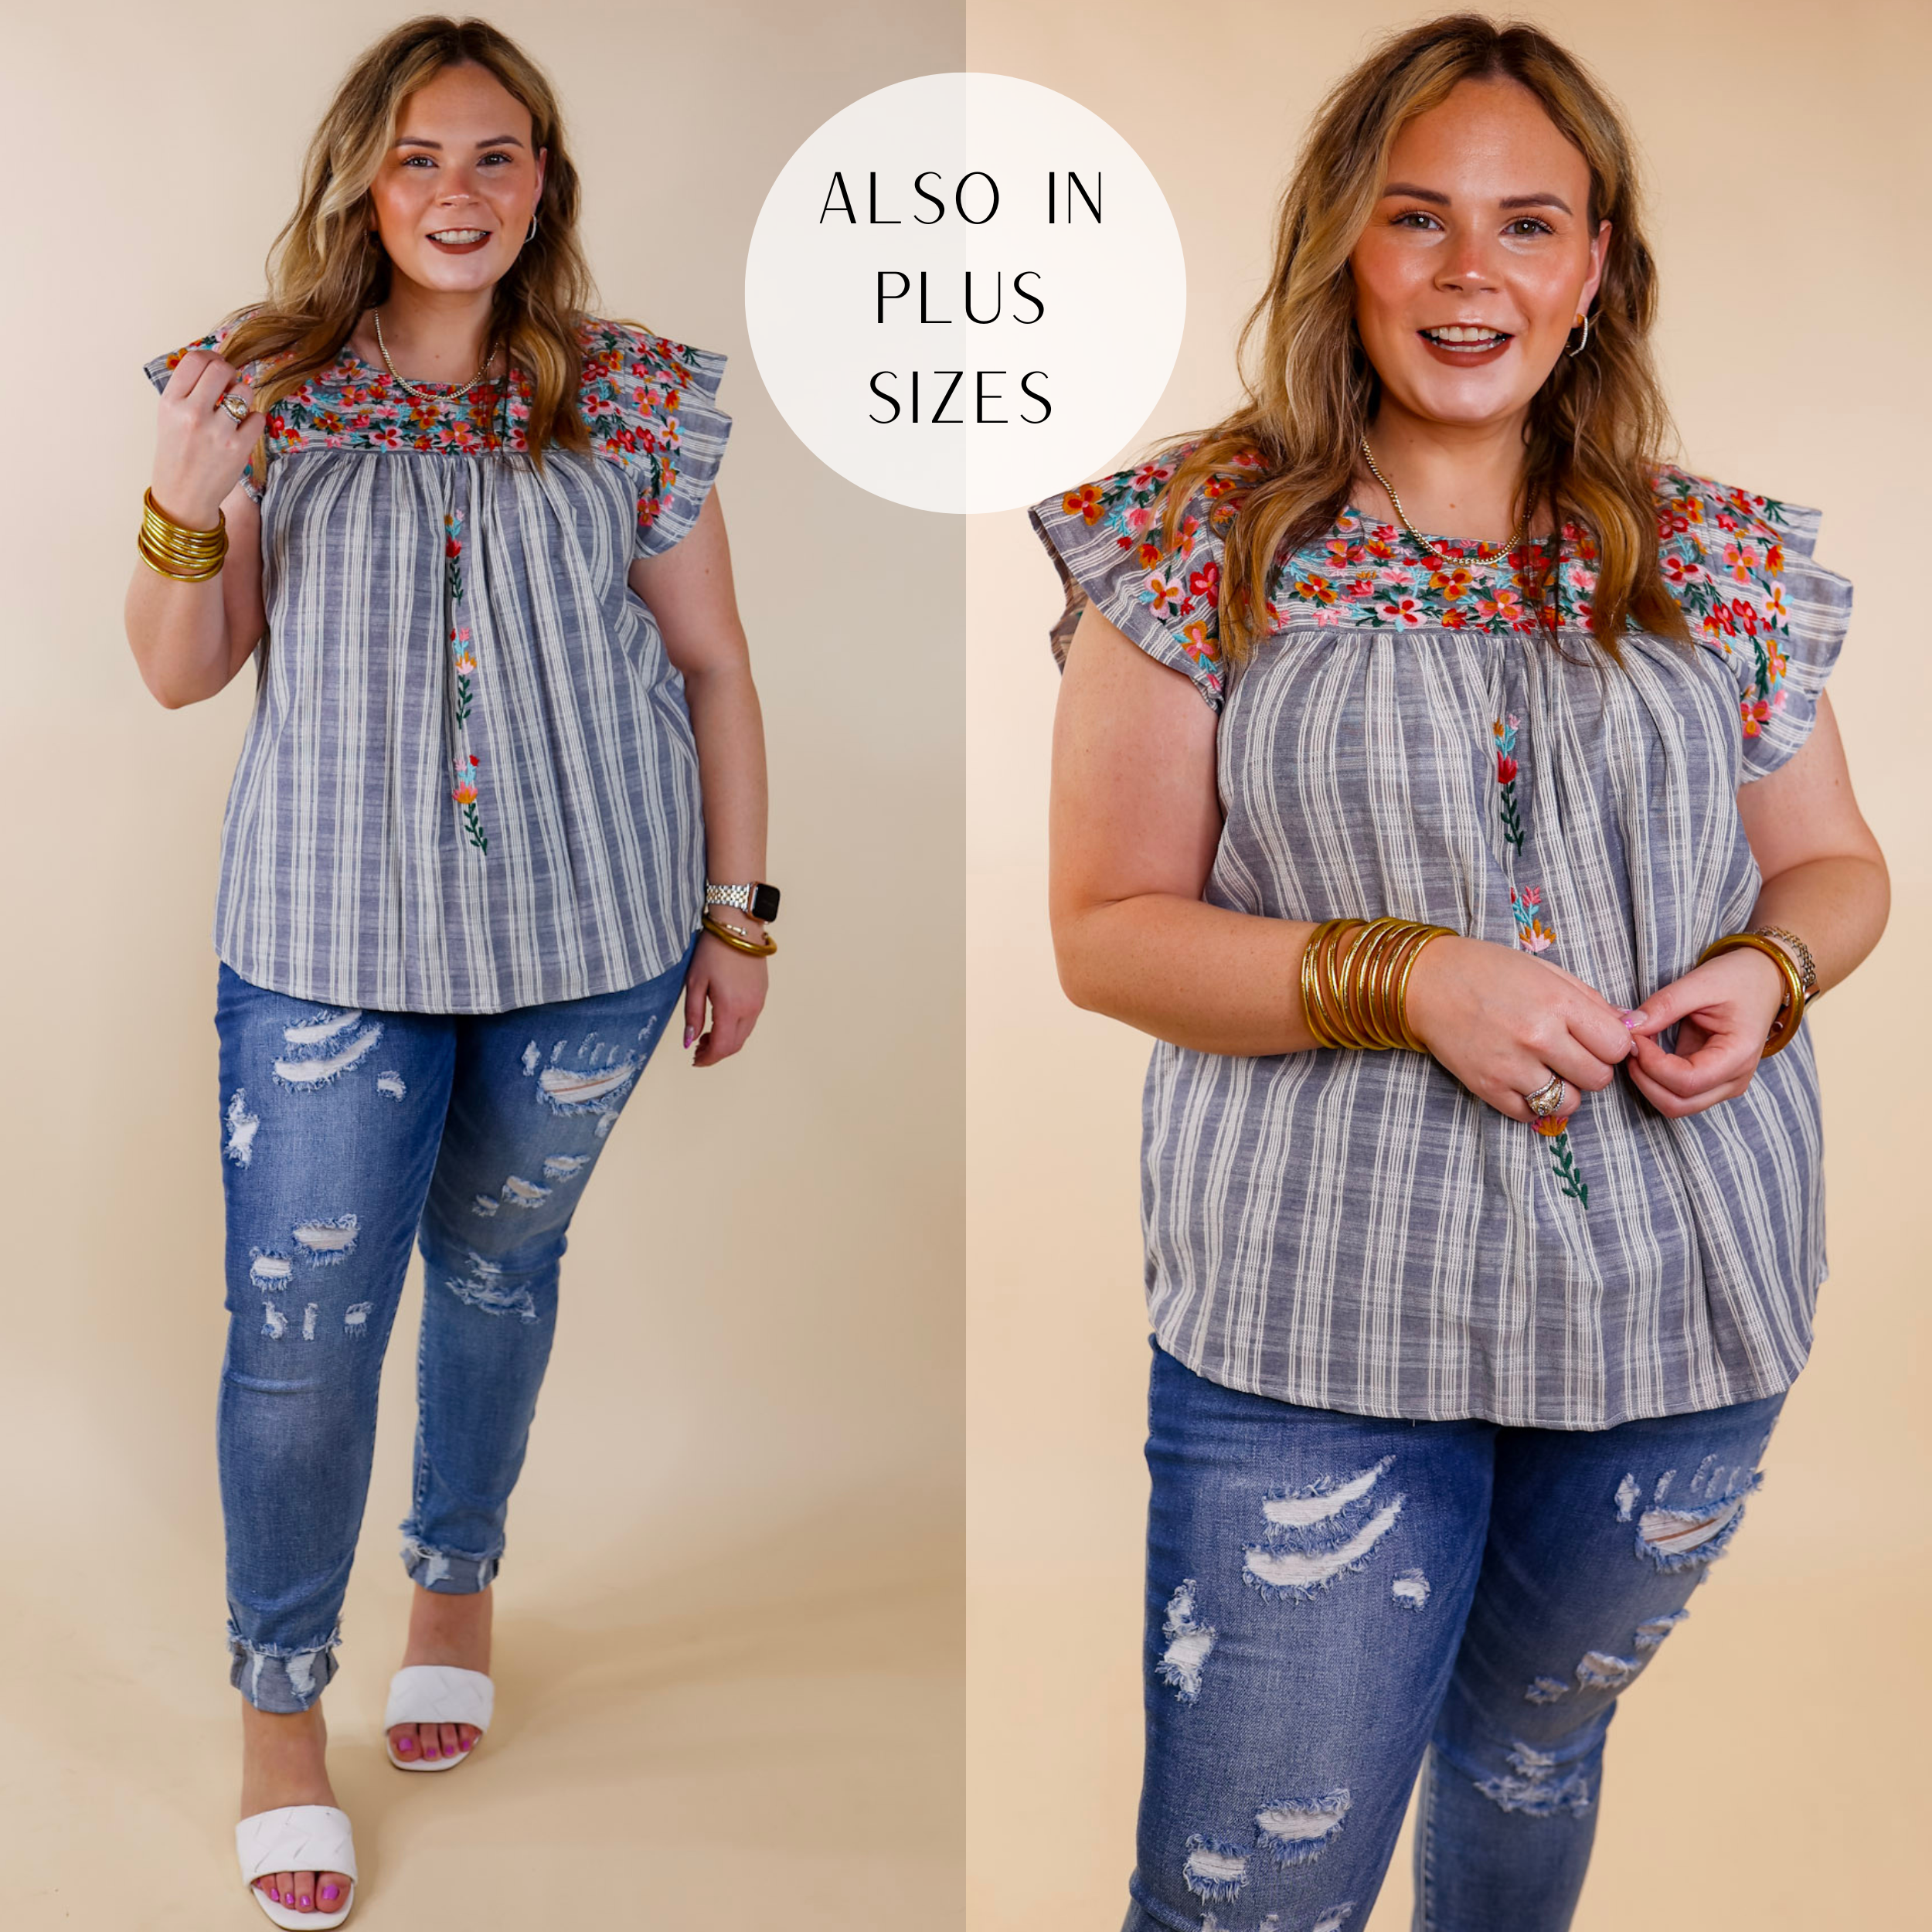 Model is wearing a blue and ivory striped top with colorful floral embroidery around the neckline. Model has it paired with distressed skinny jeans, white heels, and gold jewelry.